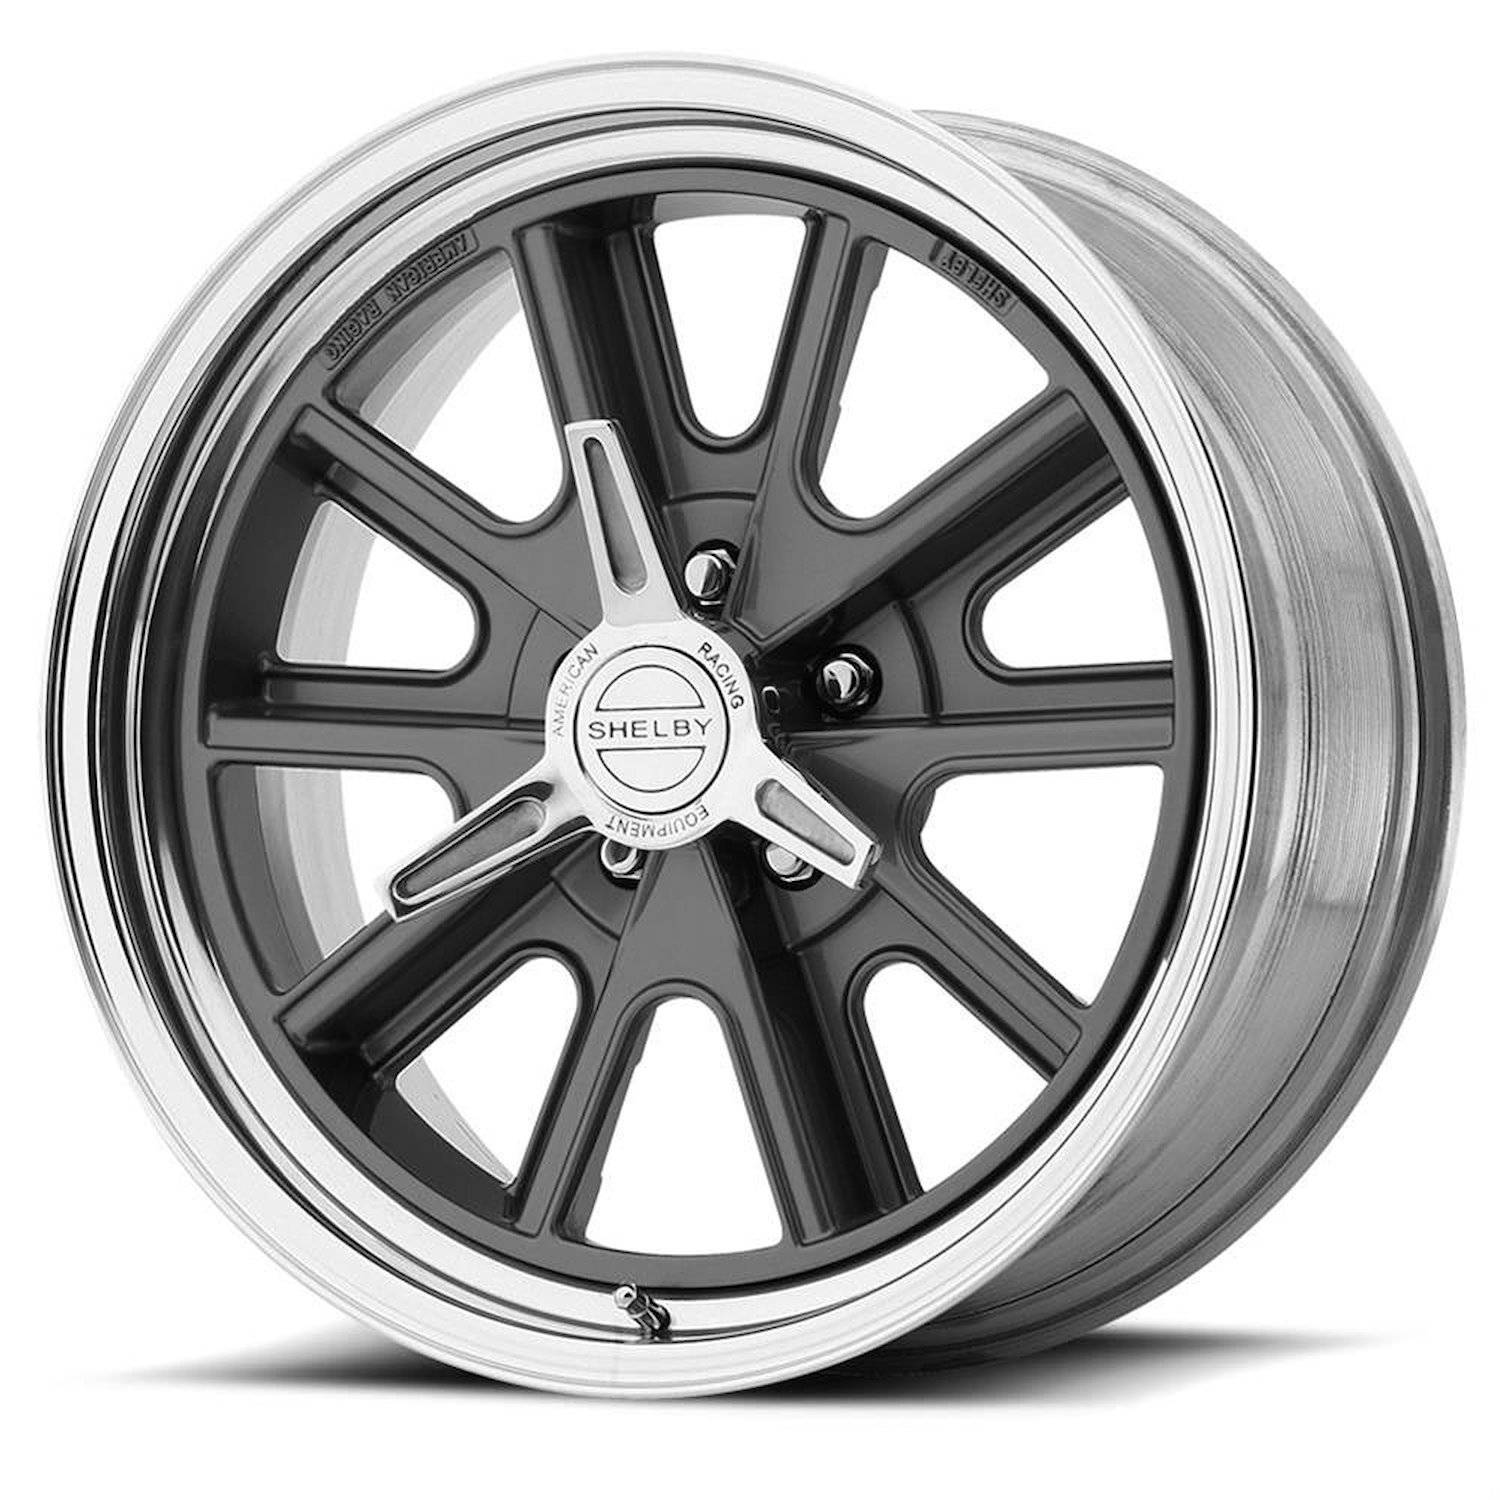 AMERICAN RACING 427 SHELBY COBRA TWO-PIECE MAG GRAY CENTER POLISHED BARREL 17 x 8 5X4.75 -6 4.26